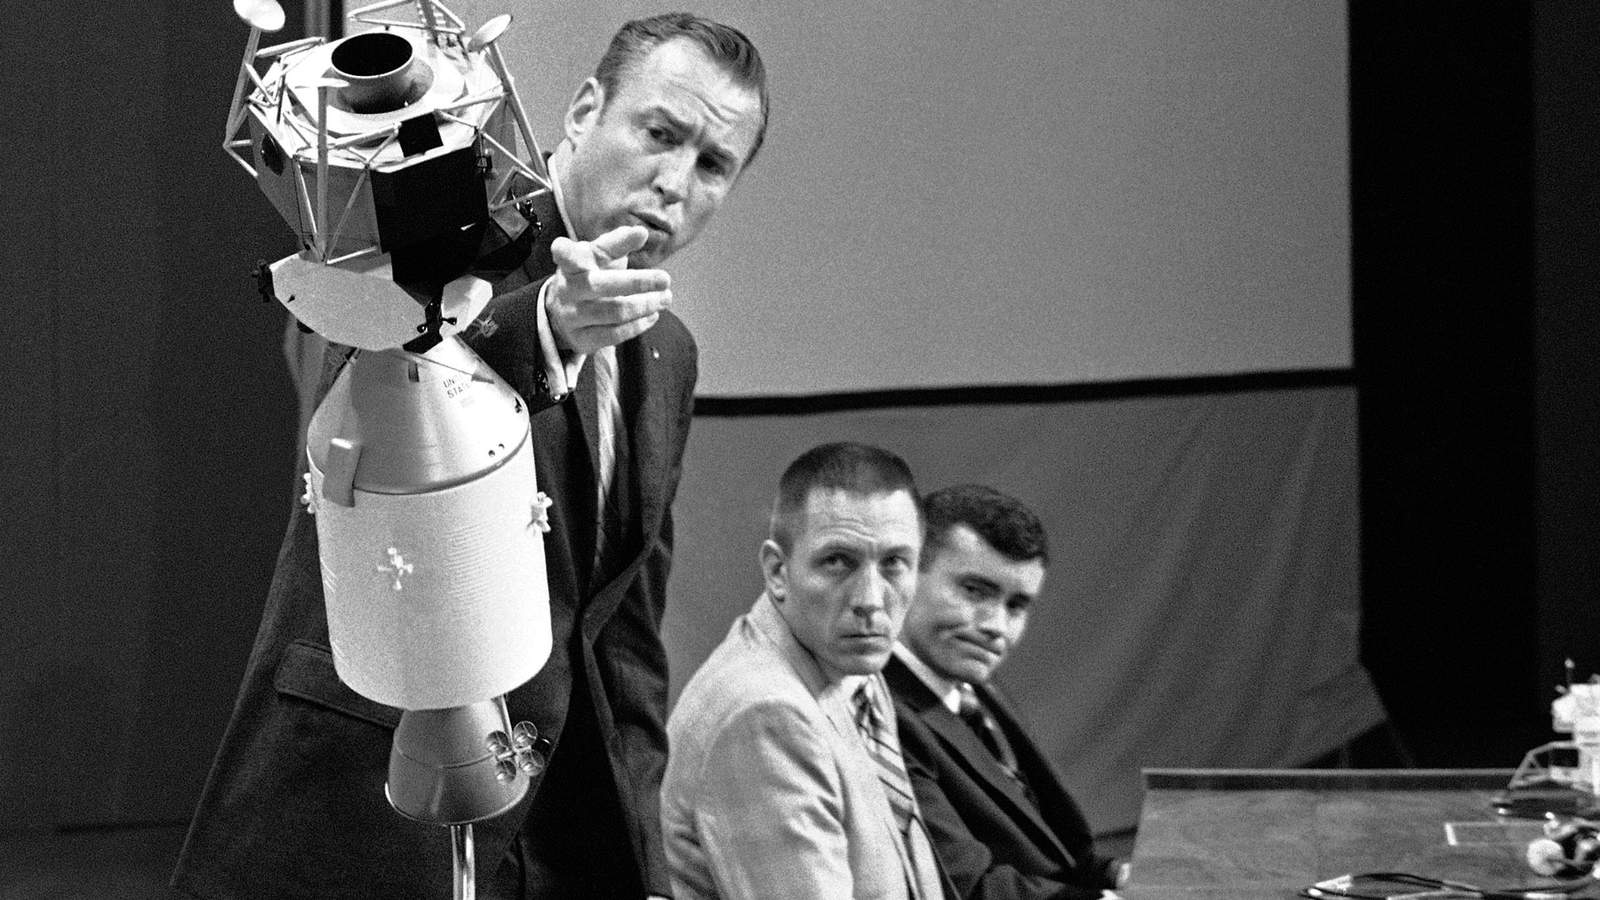 51 years later, Apollo 13 astronauts reflect on historic mission